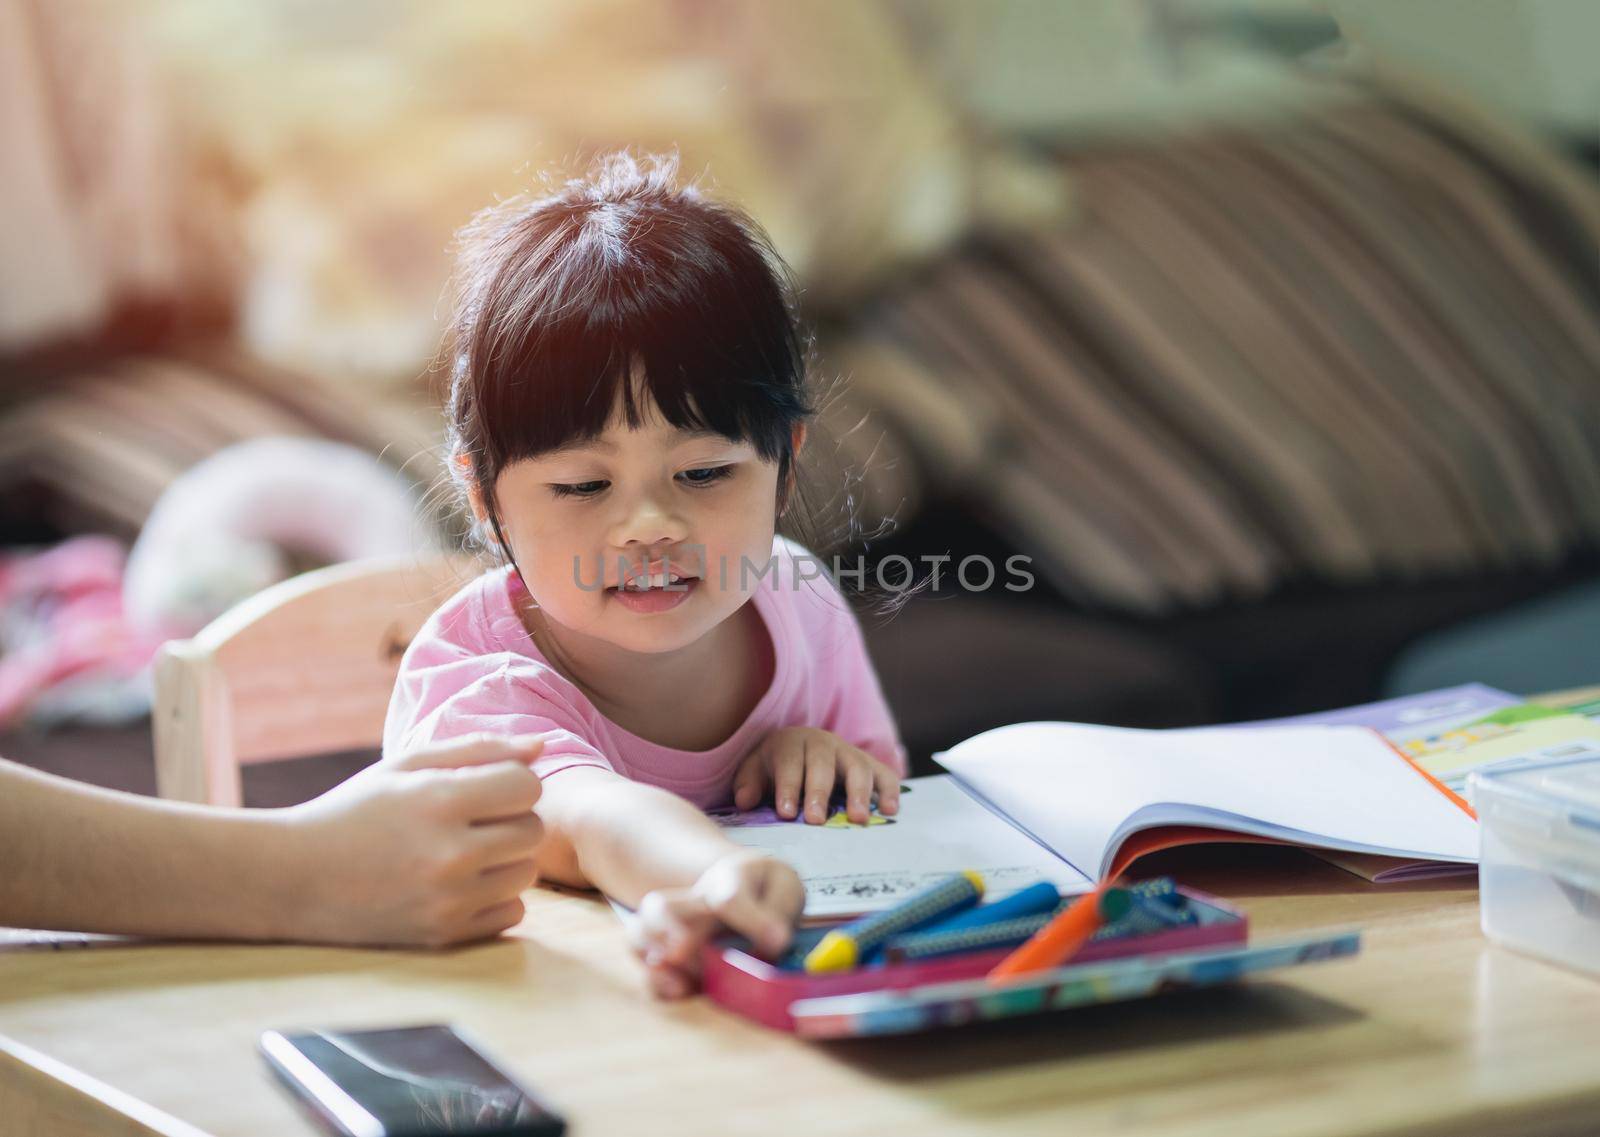 Cute little child painting with colorful paints. Asian girl and her mother using crayon drawing color.Baby artist activity lifestyle concept.